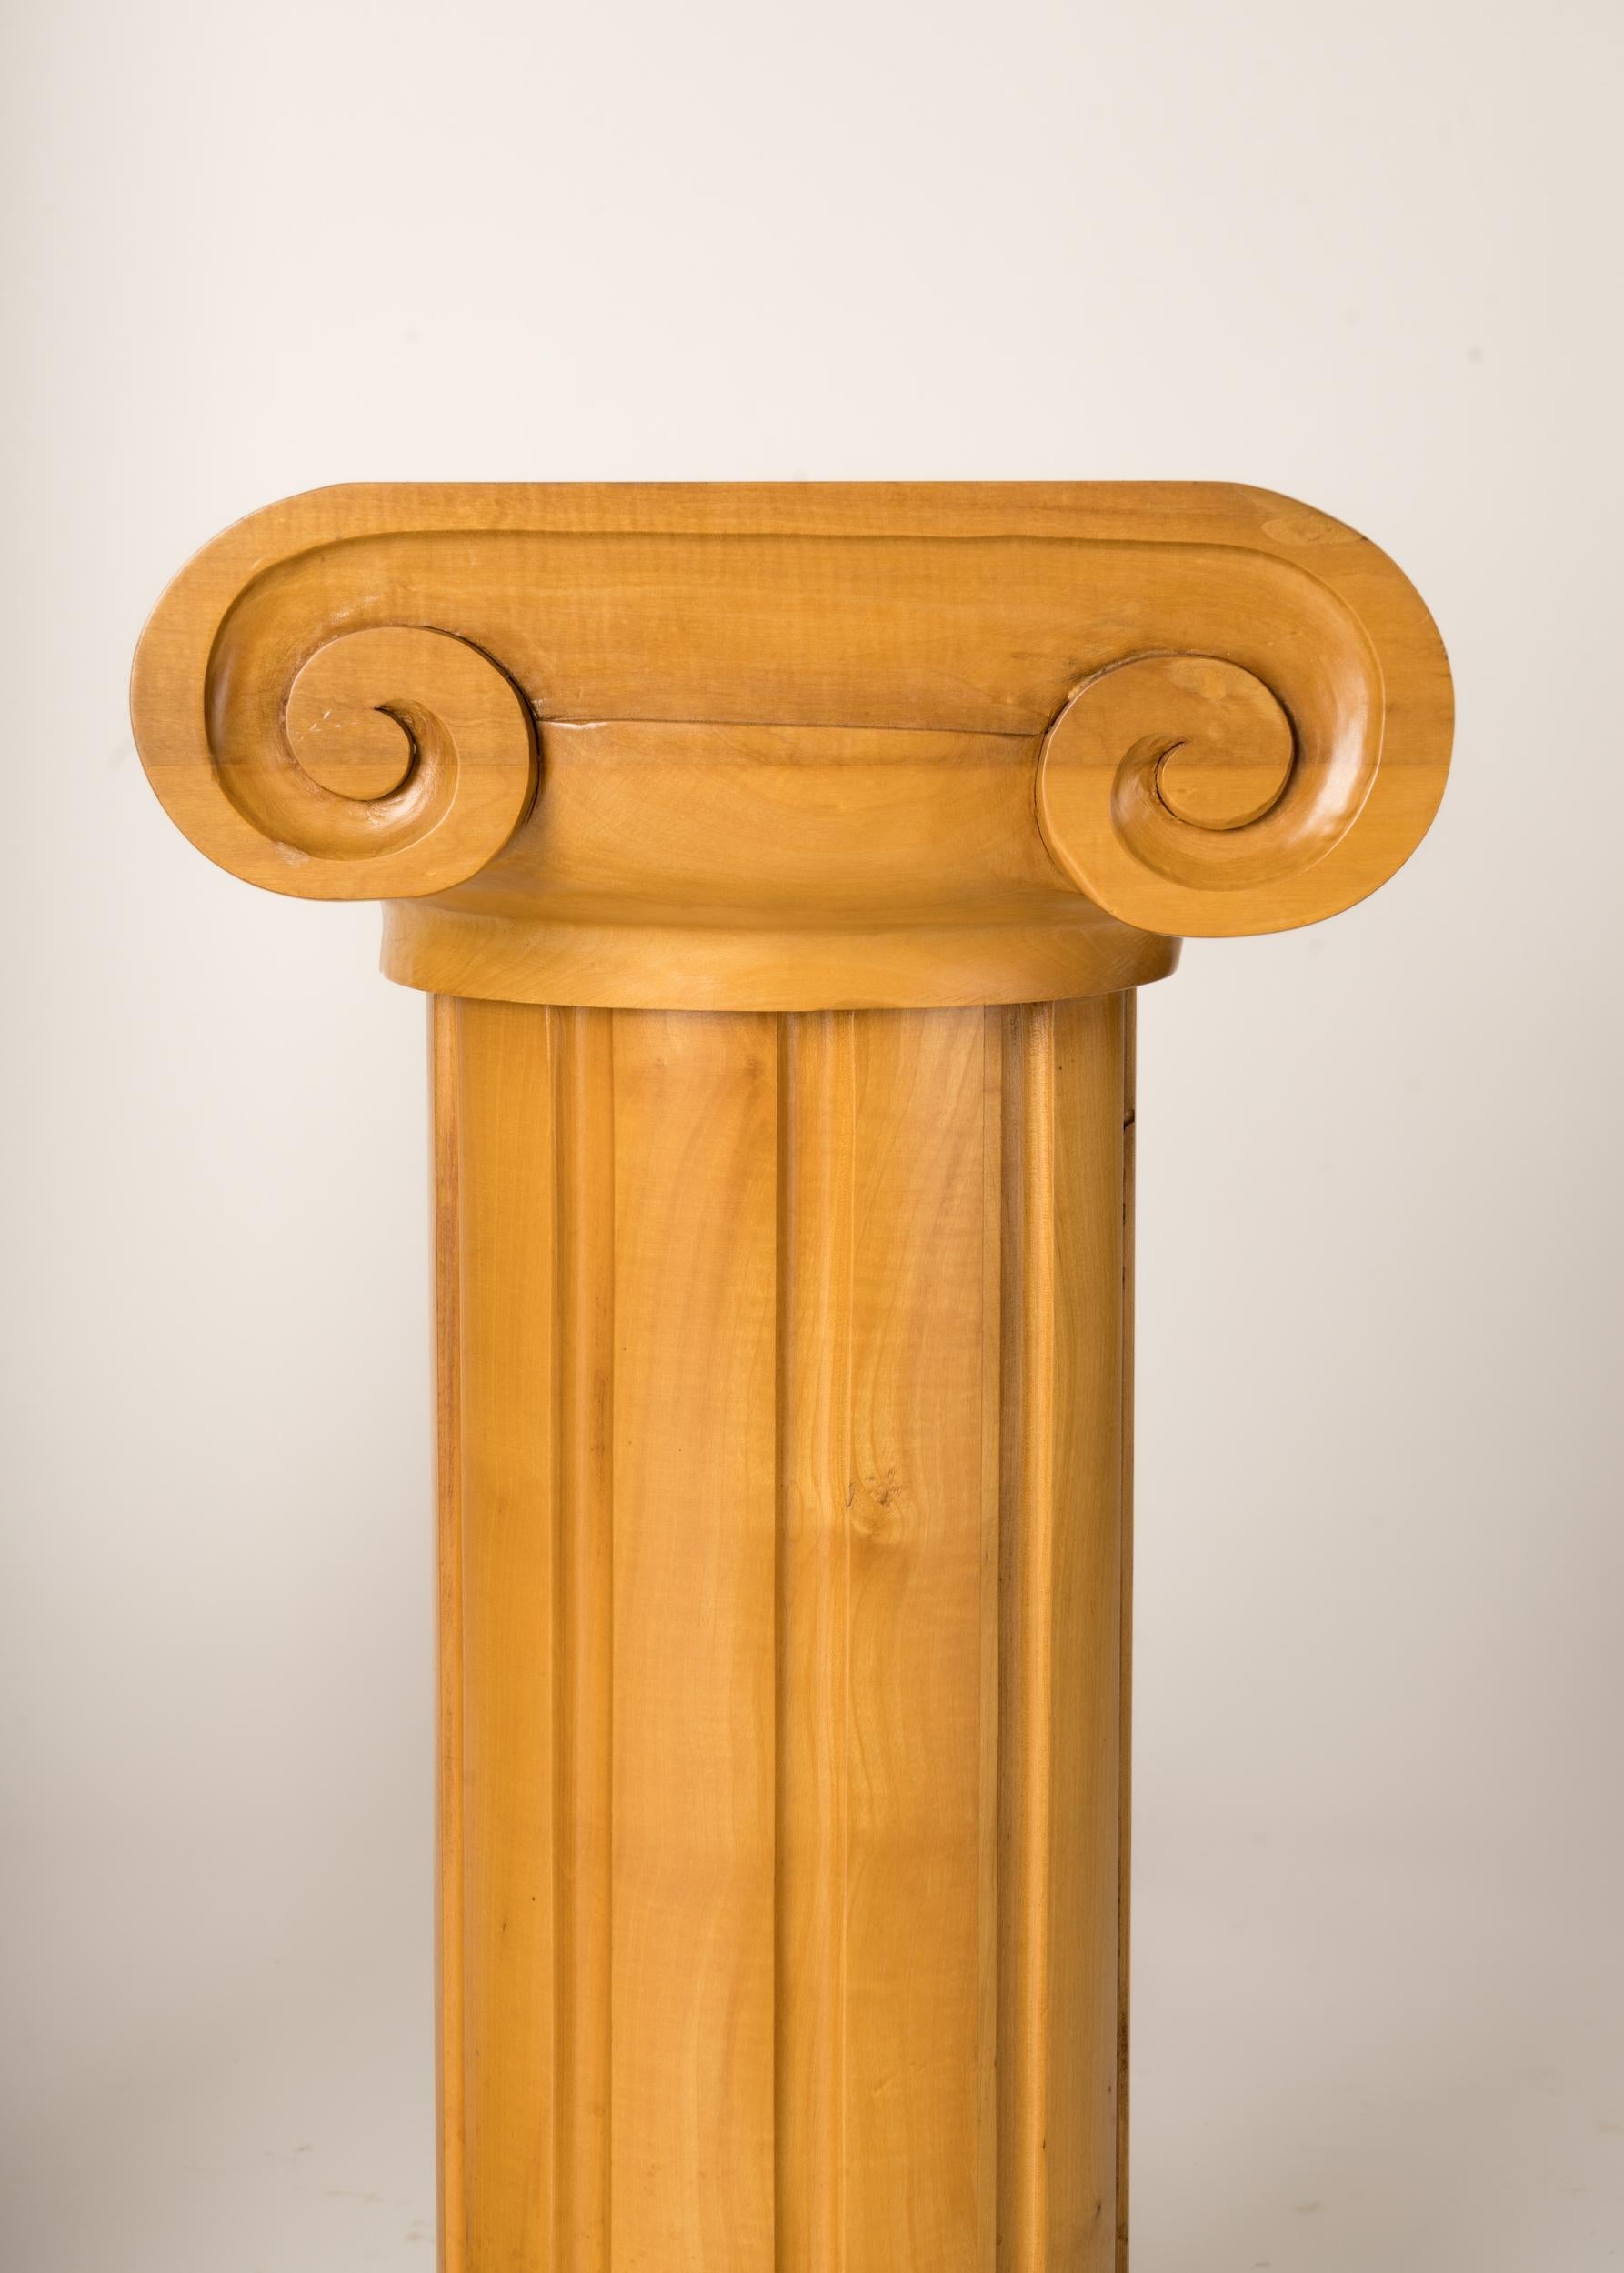 Memphis Inspired Solid Sycamore Ionic Pedestals or Gueridon, Italy 1970's For Sale 7